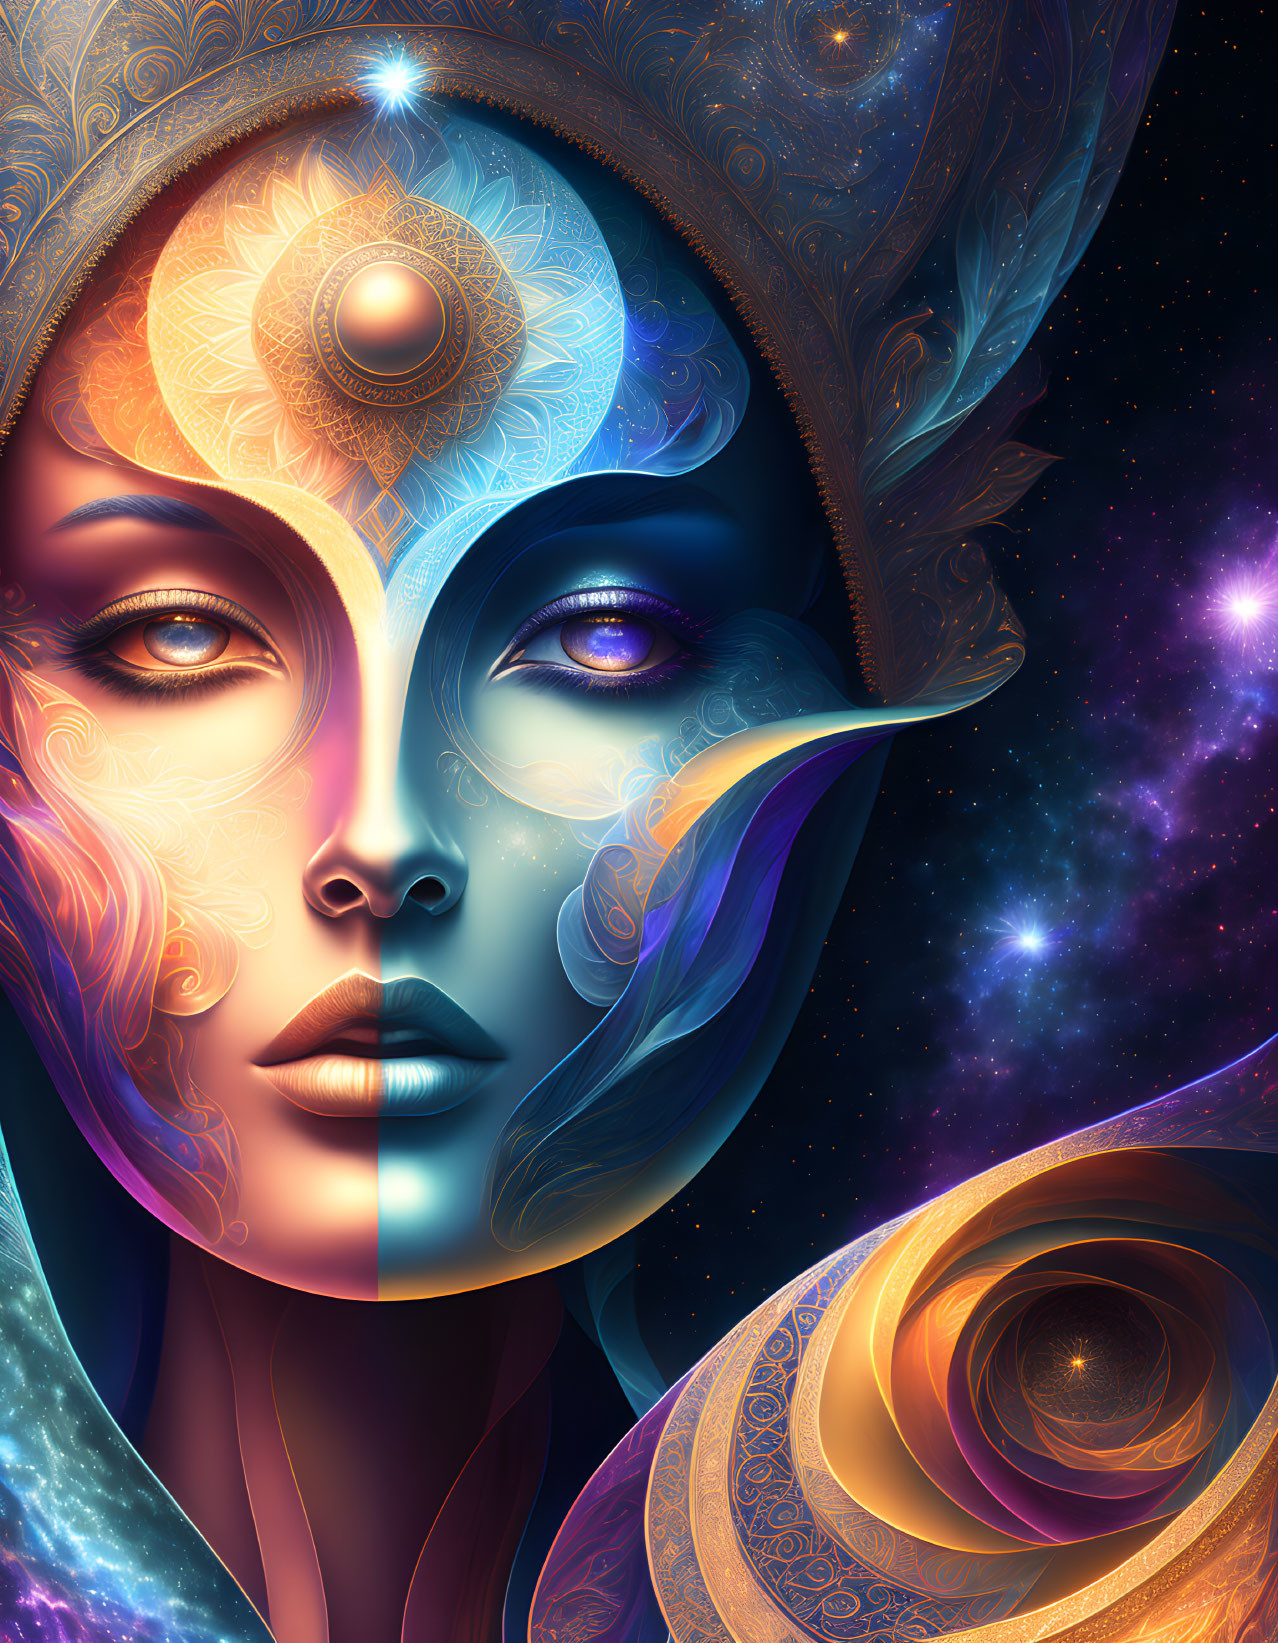 Symmetrical female face with cosmic elements and intricate patterns